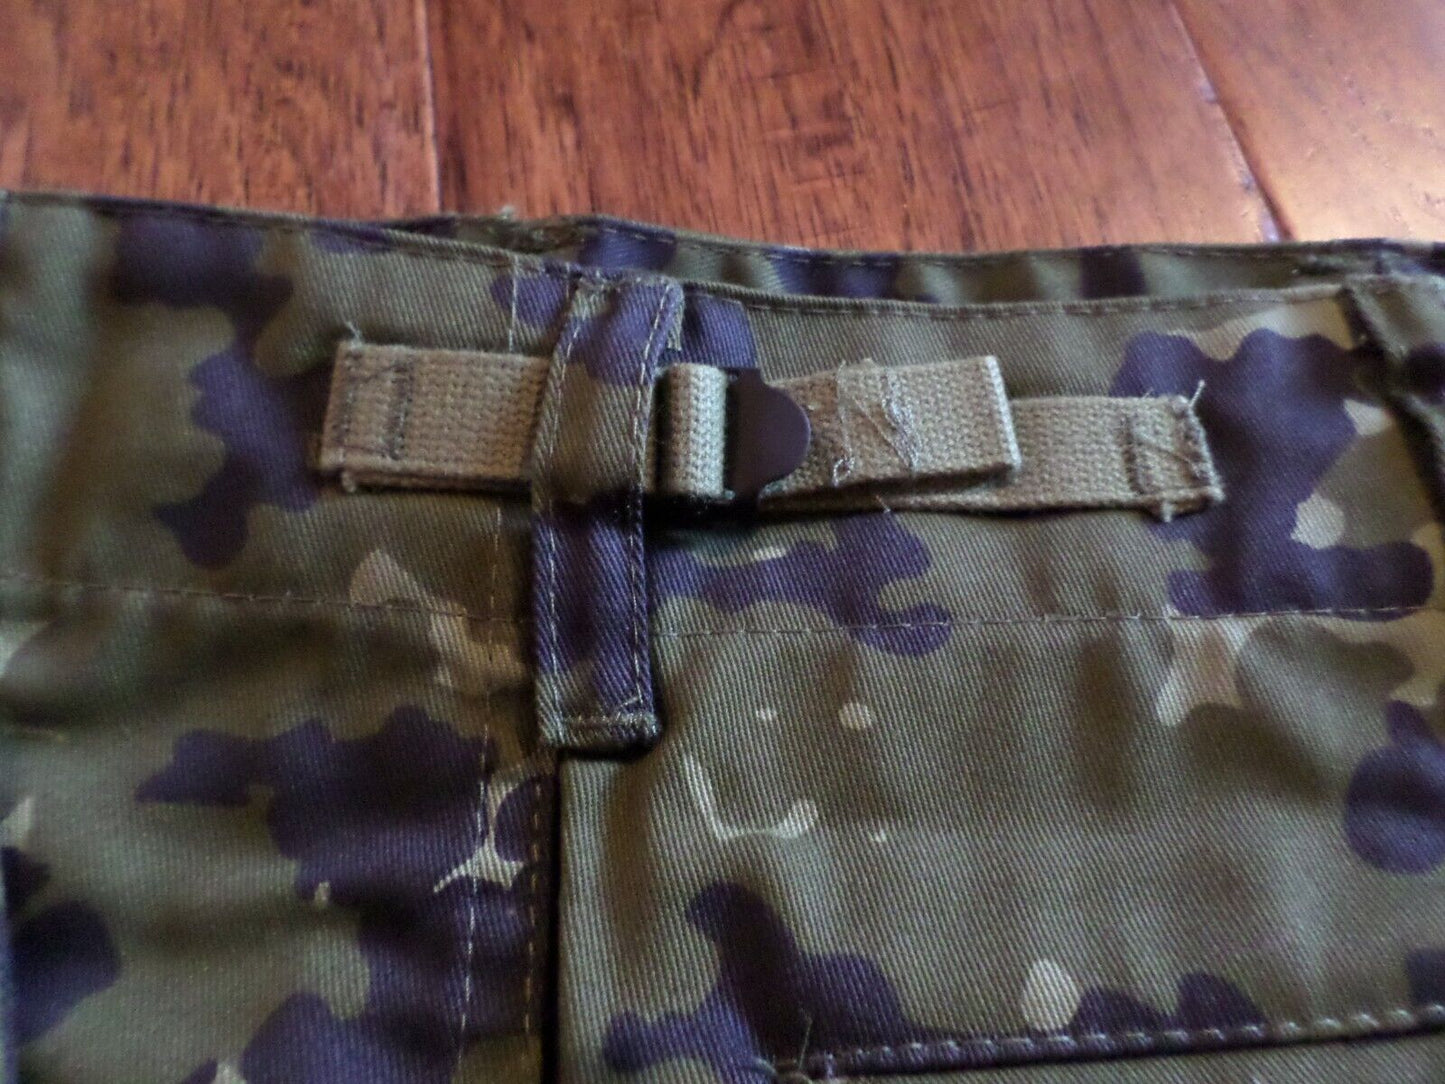 DANISH MILITARY CAMOUFLAGE BDU PANTS MILITARY CARGO 6 POCKET FATIGUE TROUSERS